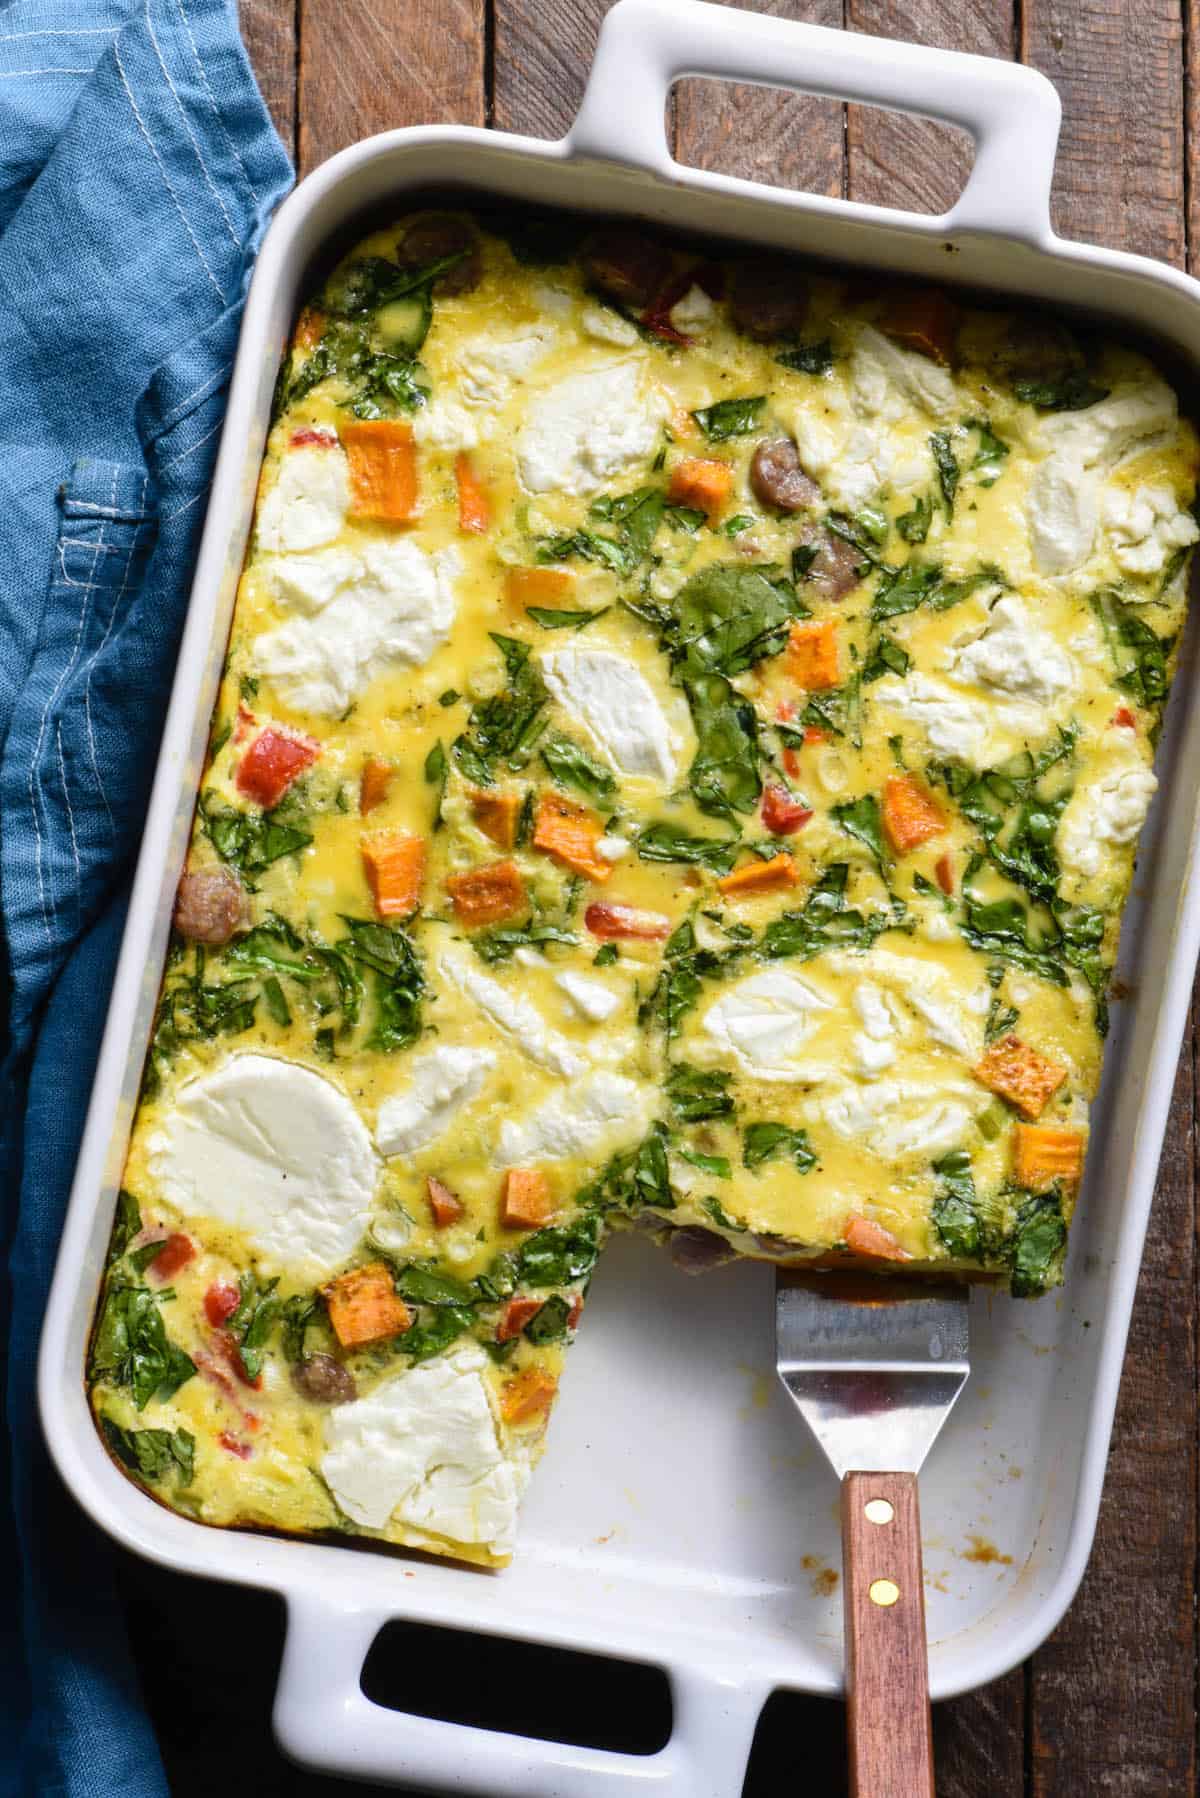 Sweet potato breakfast casserole made with eggs, sausage, spinach and goat cheese, in rectangular white baking dish, with a serving spatula lifting a piece out.